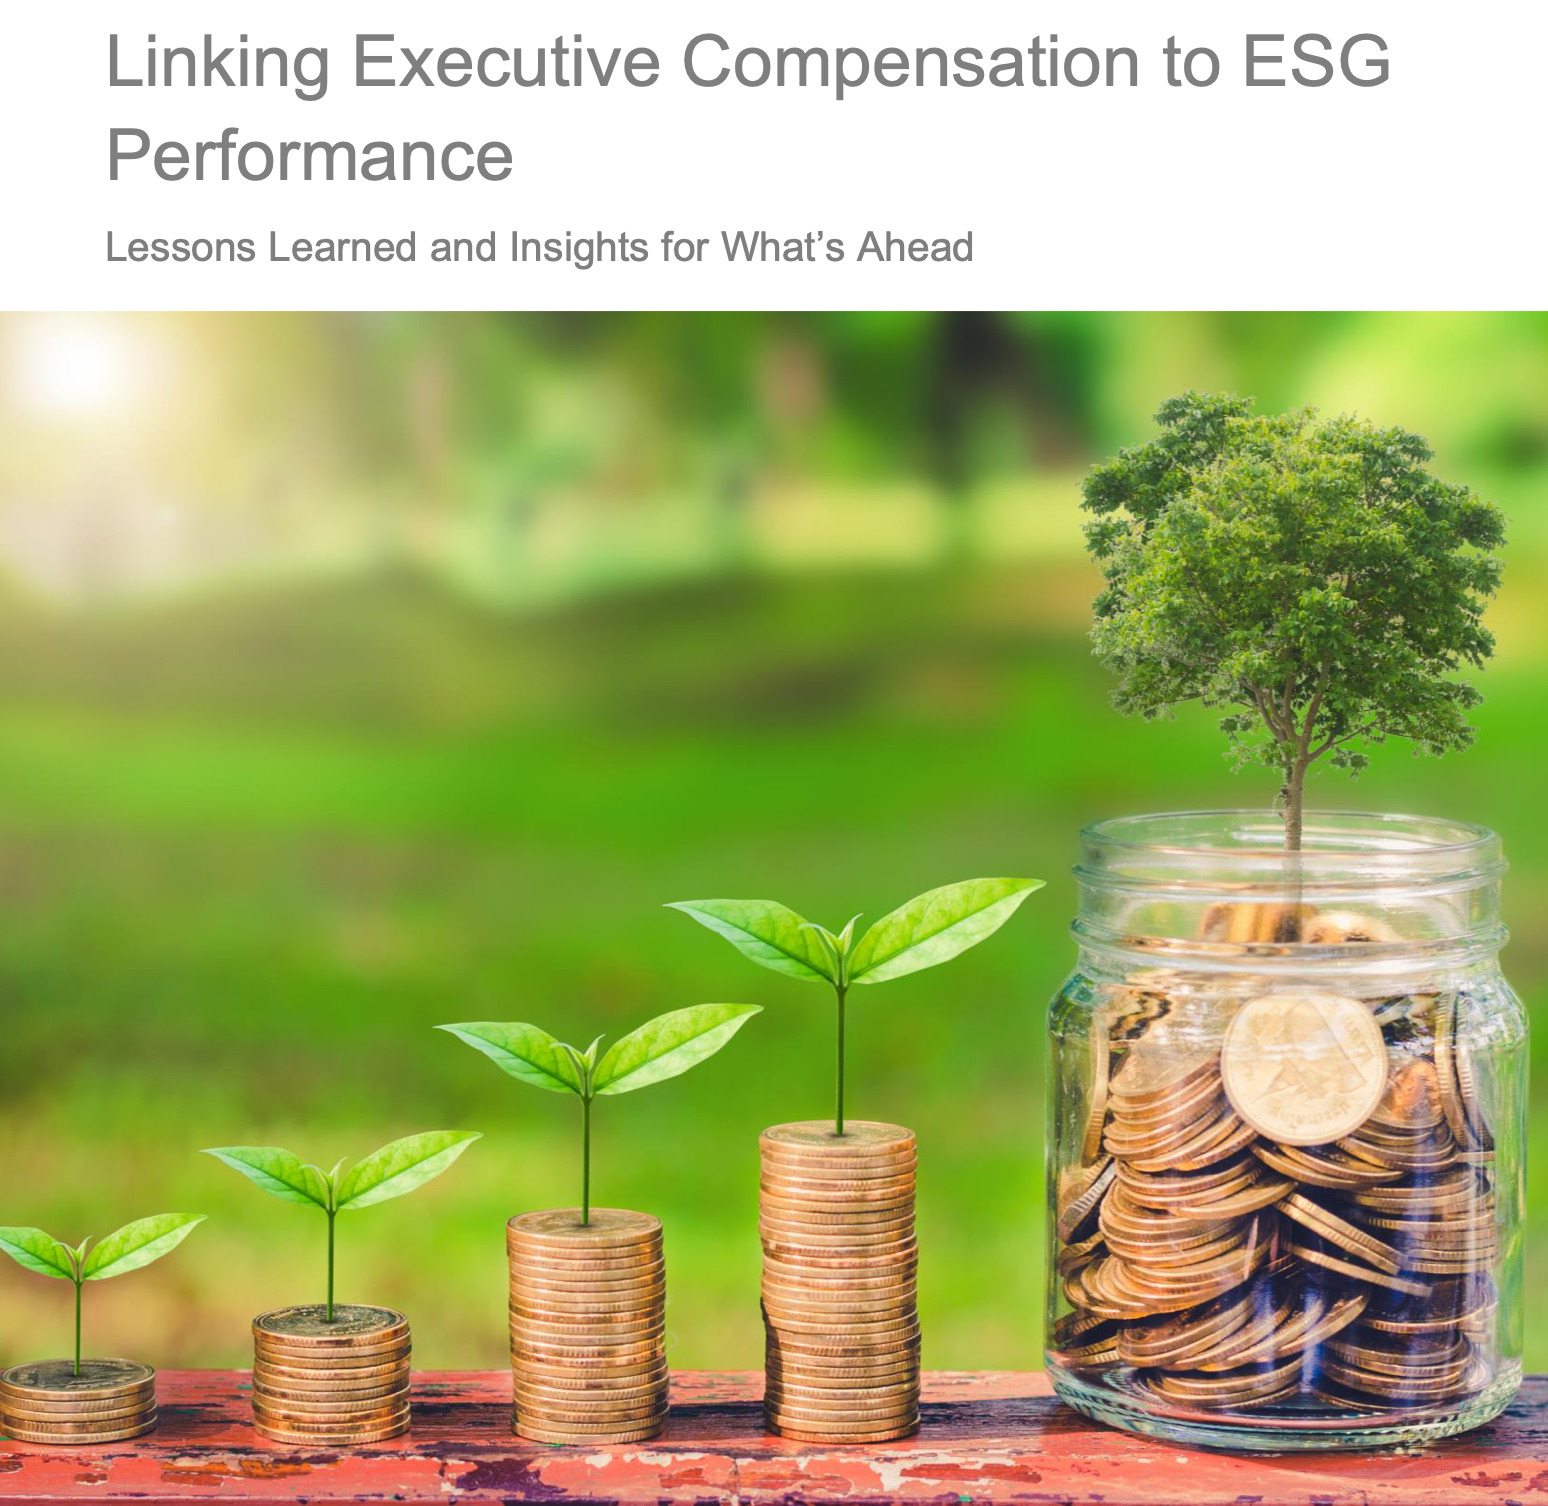 The Conference Board has published the report: “Linking Executive Compensation to ESG Performance”